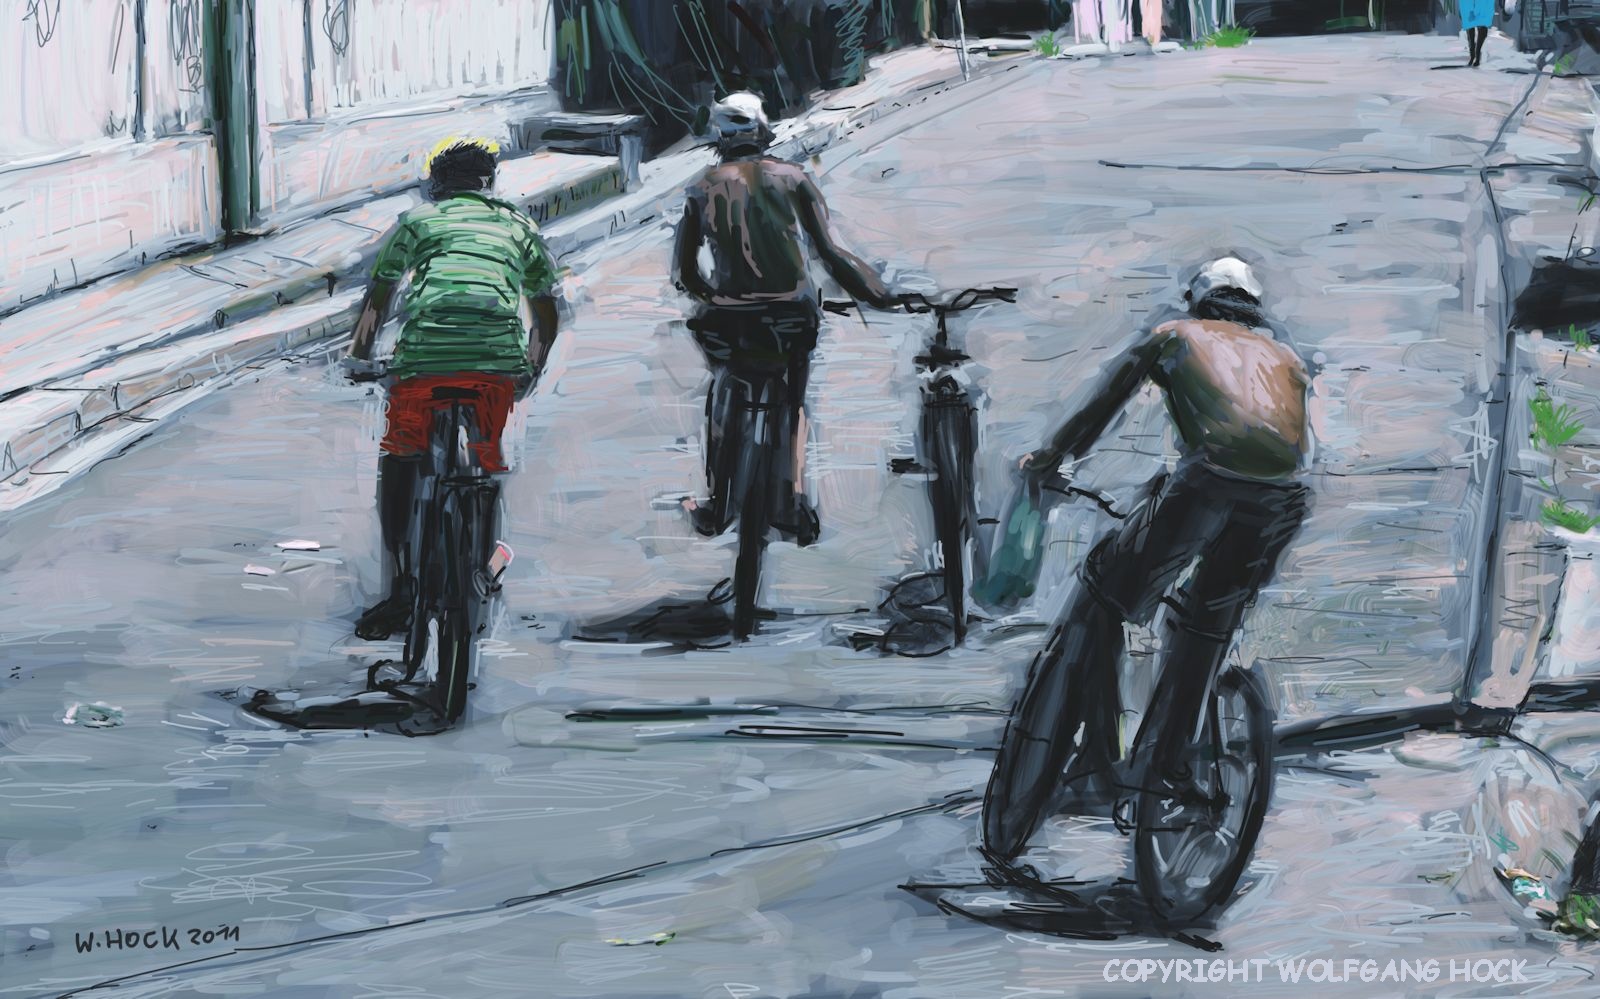 Cyclists 2011   Inkjet printed computer painting on canvas, edition of 5 105 x 65 cm (38 megapixel)